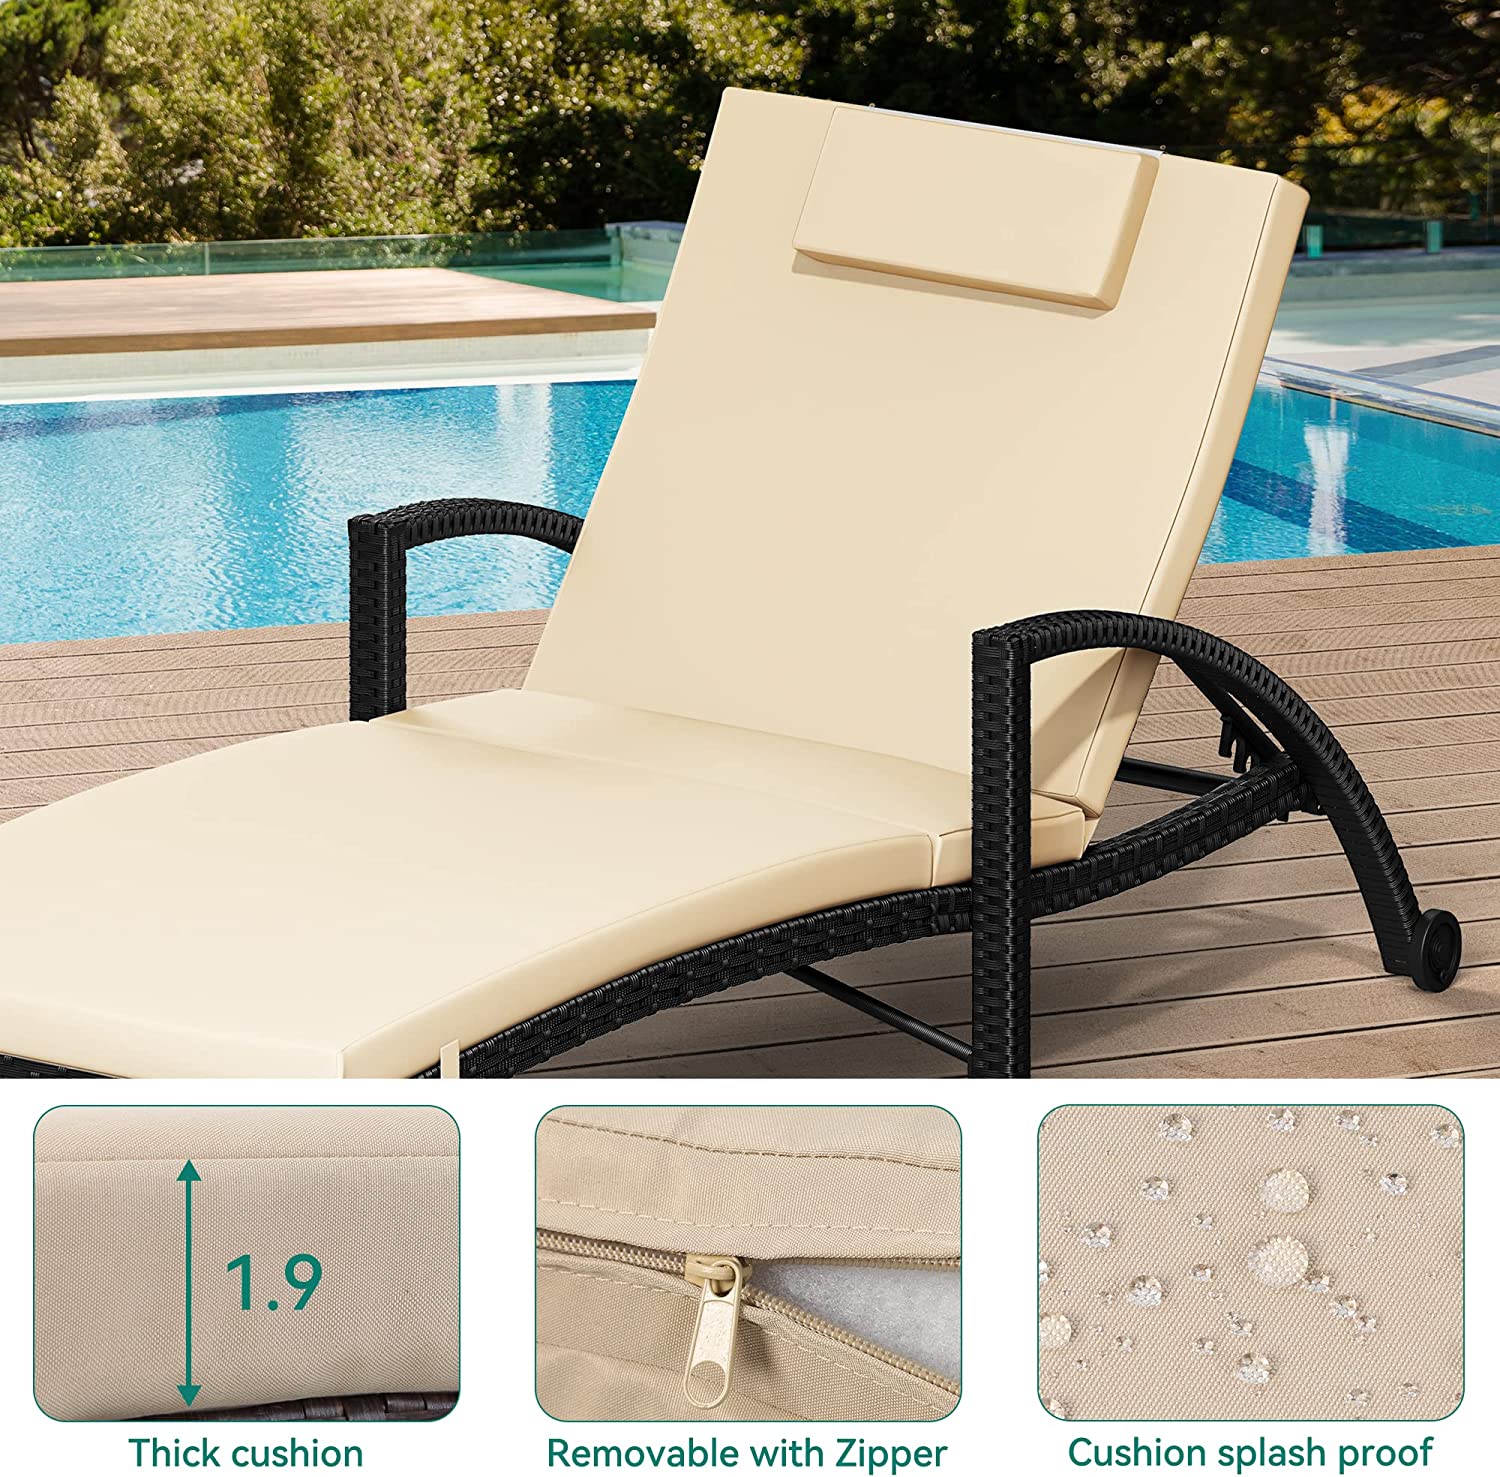 YITAHOME Outdoor Chaise Lounge Chairs, PE Rattan Wicker Patio Pool Loungers with Adjustable Backrest, Arm, Cushion, Pillow and Wheels for Poolside Backyard Porch Garden Beach (4, Black) - image 4 of 9